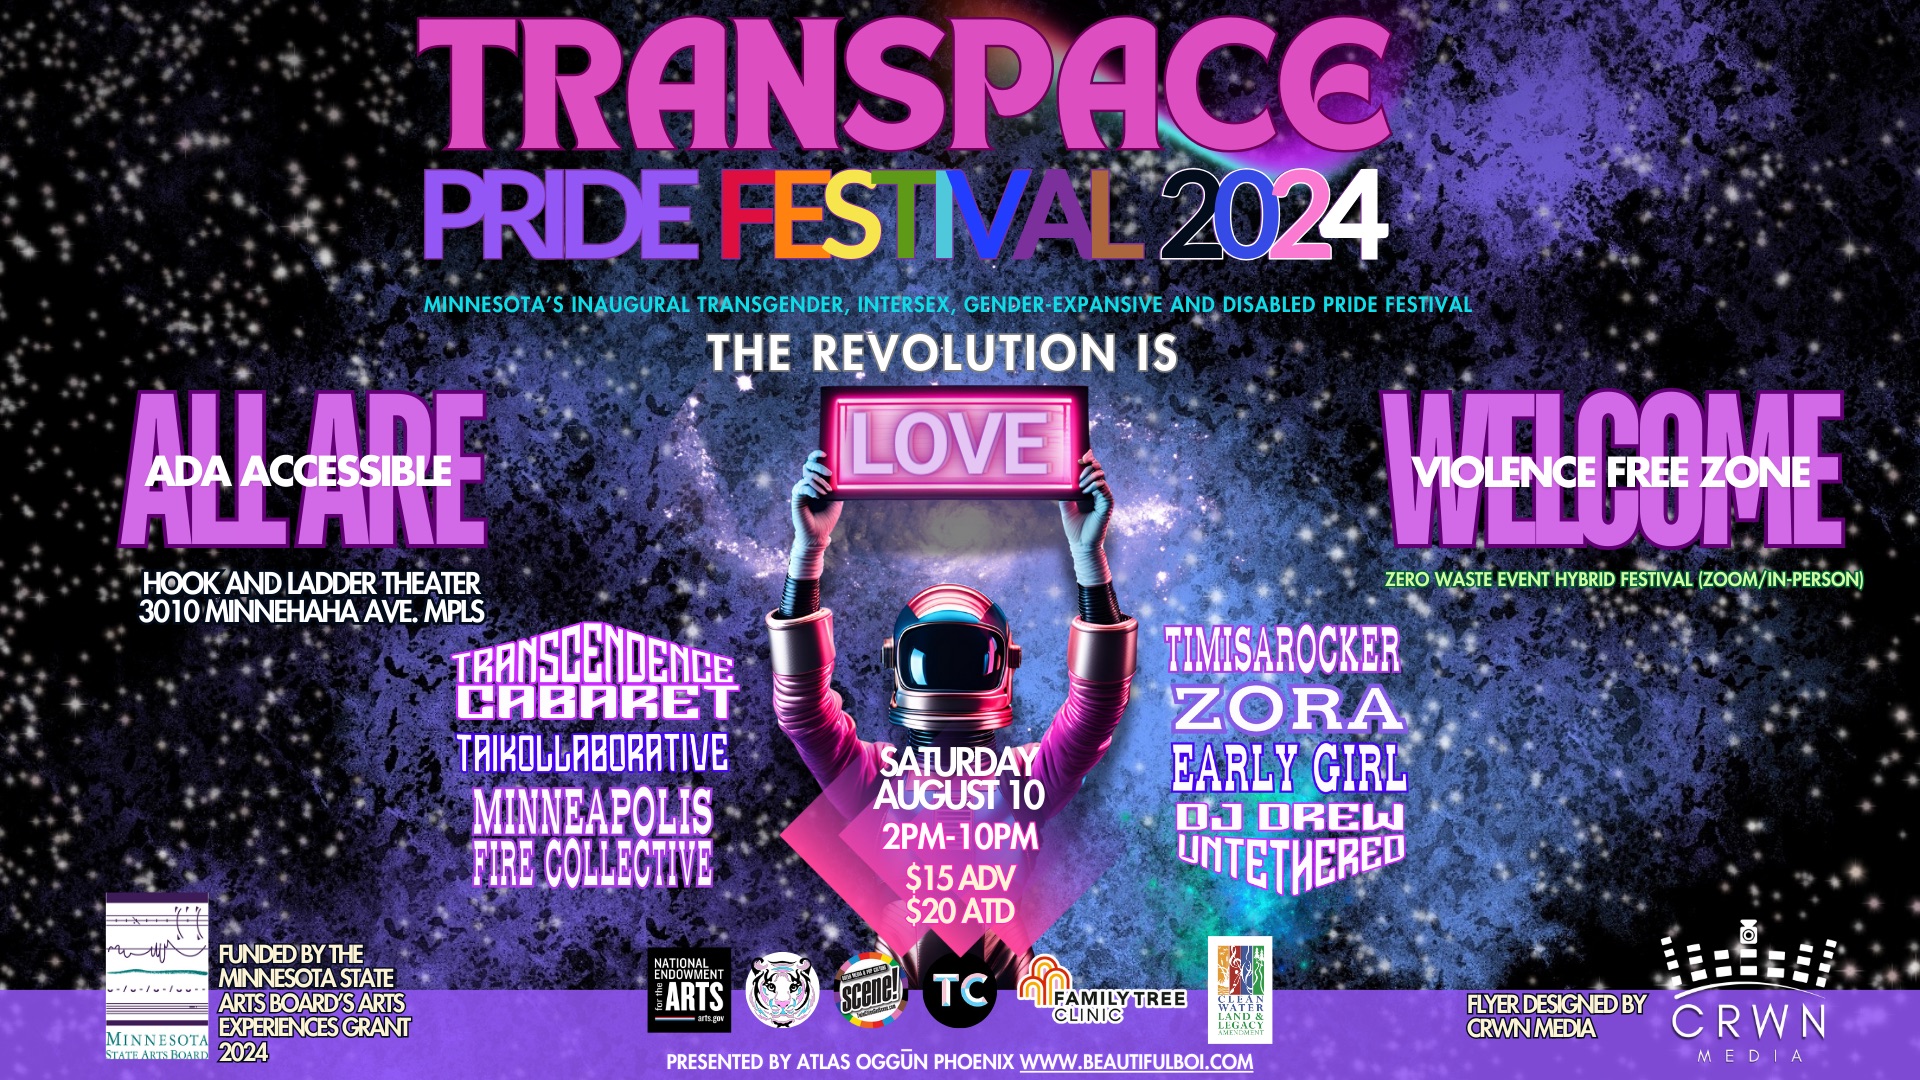 Presented by Atlas Oggun Phoenix TransSpace Pride Festival Featuring performances by: Transcendence Cabaret, TIMISAROCKER, ZORA, Early Girl, Minneapolis Fire Collective and Taikollaborative! Also featuring an Acknowledgement Ceremony for those who have been lost and/or publicly abused. Saturday, August 10 The Hook and Ladder Theater Doors 1pm:: Program Starts 2pm :: 21+ $15 Advance / $20 Day of Show* $15 Broadcast Only Ticket** *sliding scale offered at door **Zoom links with access codes will be emailed 24-hours prior to event